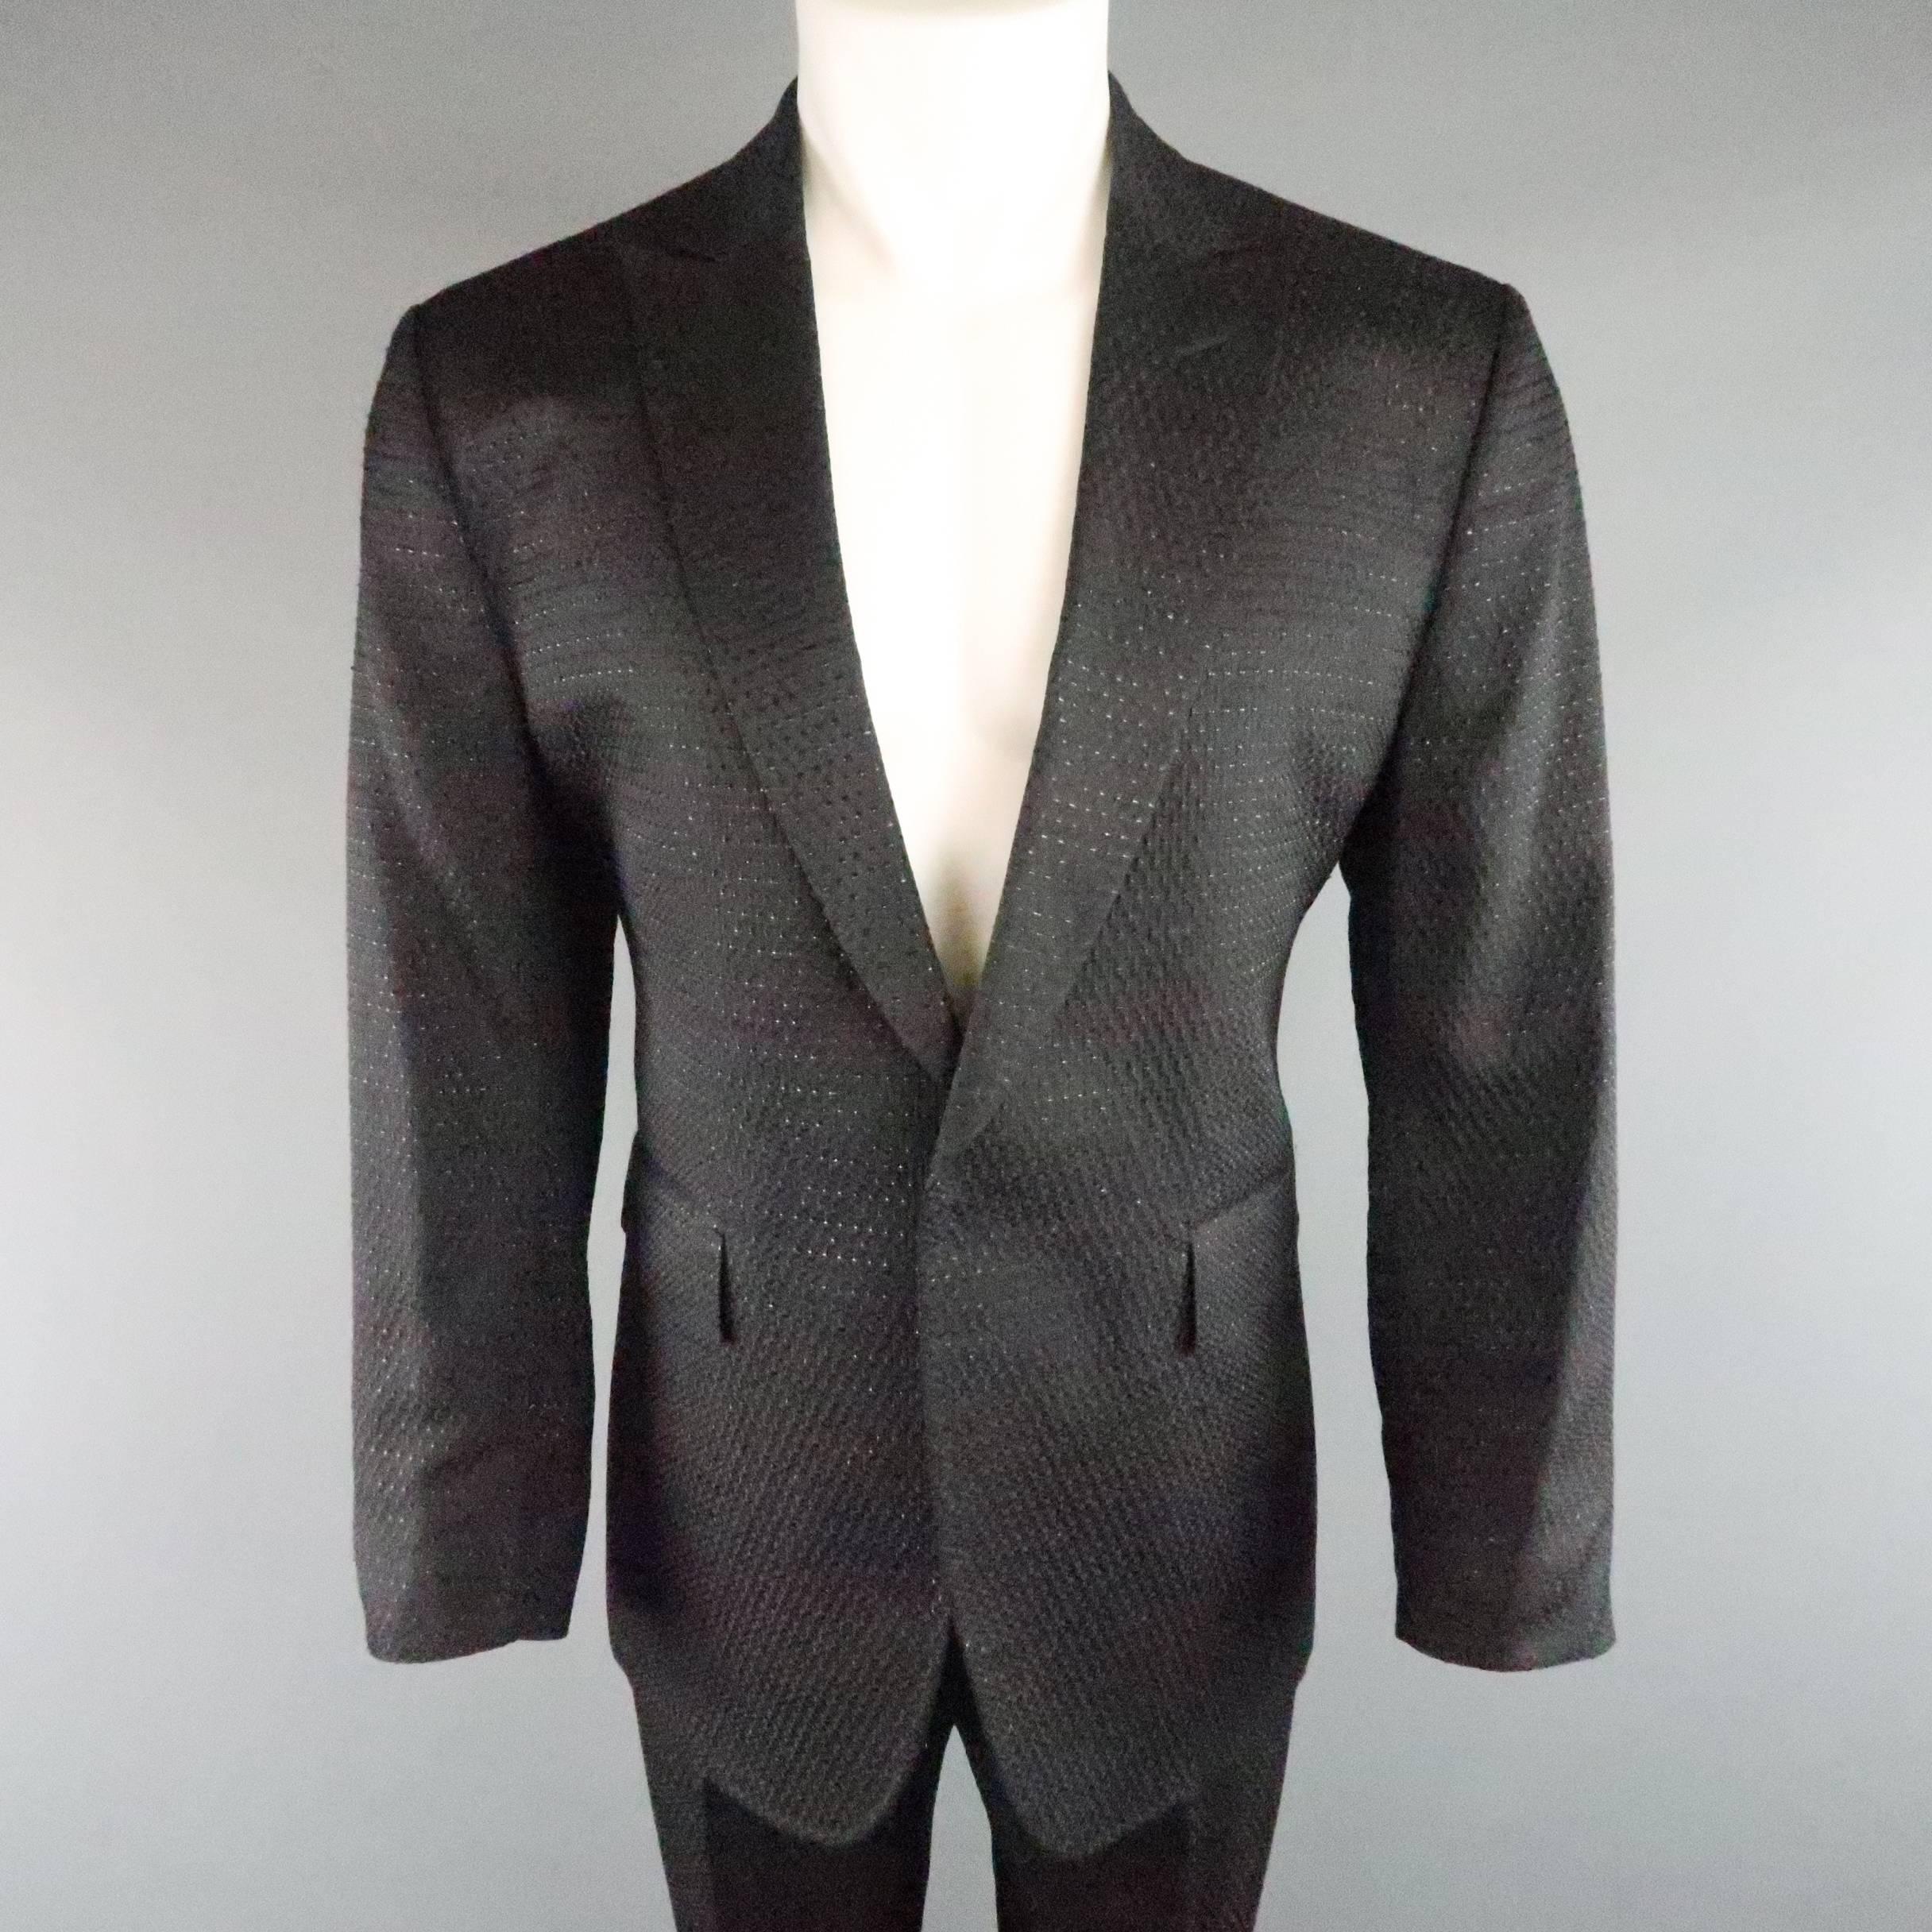 CoSTUME NATIONAL statement suit comes in a black brocade textured fabric with black sparkle foil throughout and includes a single breasted sport coat with peak lapel, hidden single button closure, and single button cuffs and matching flat front